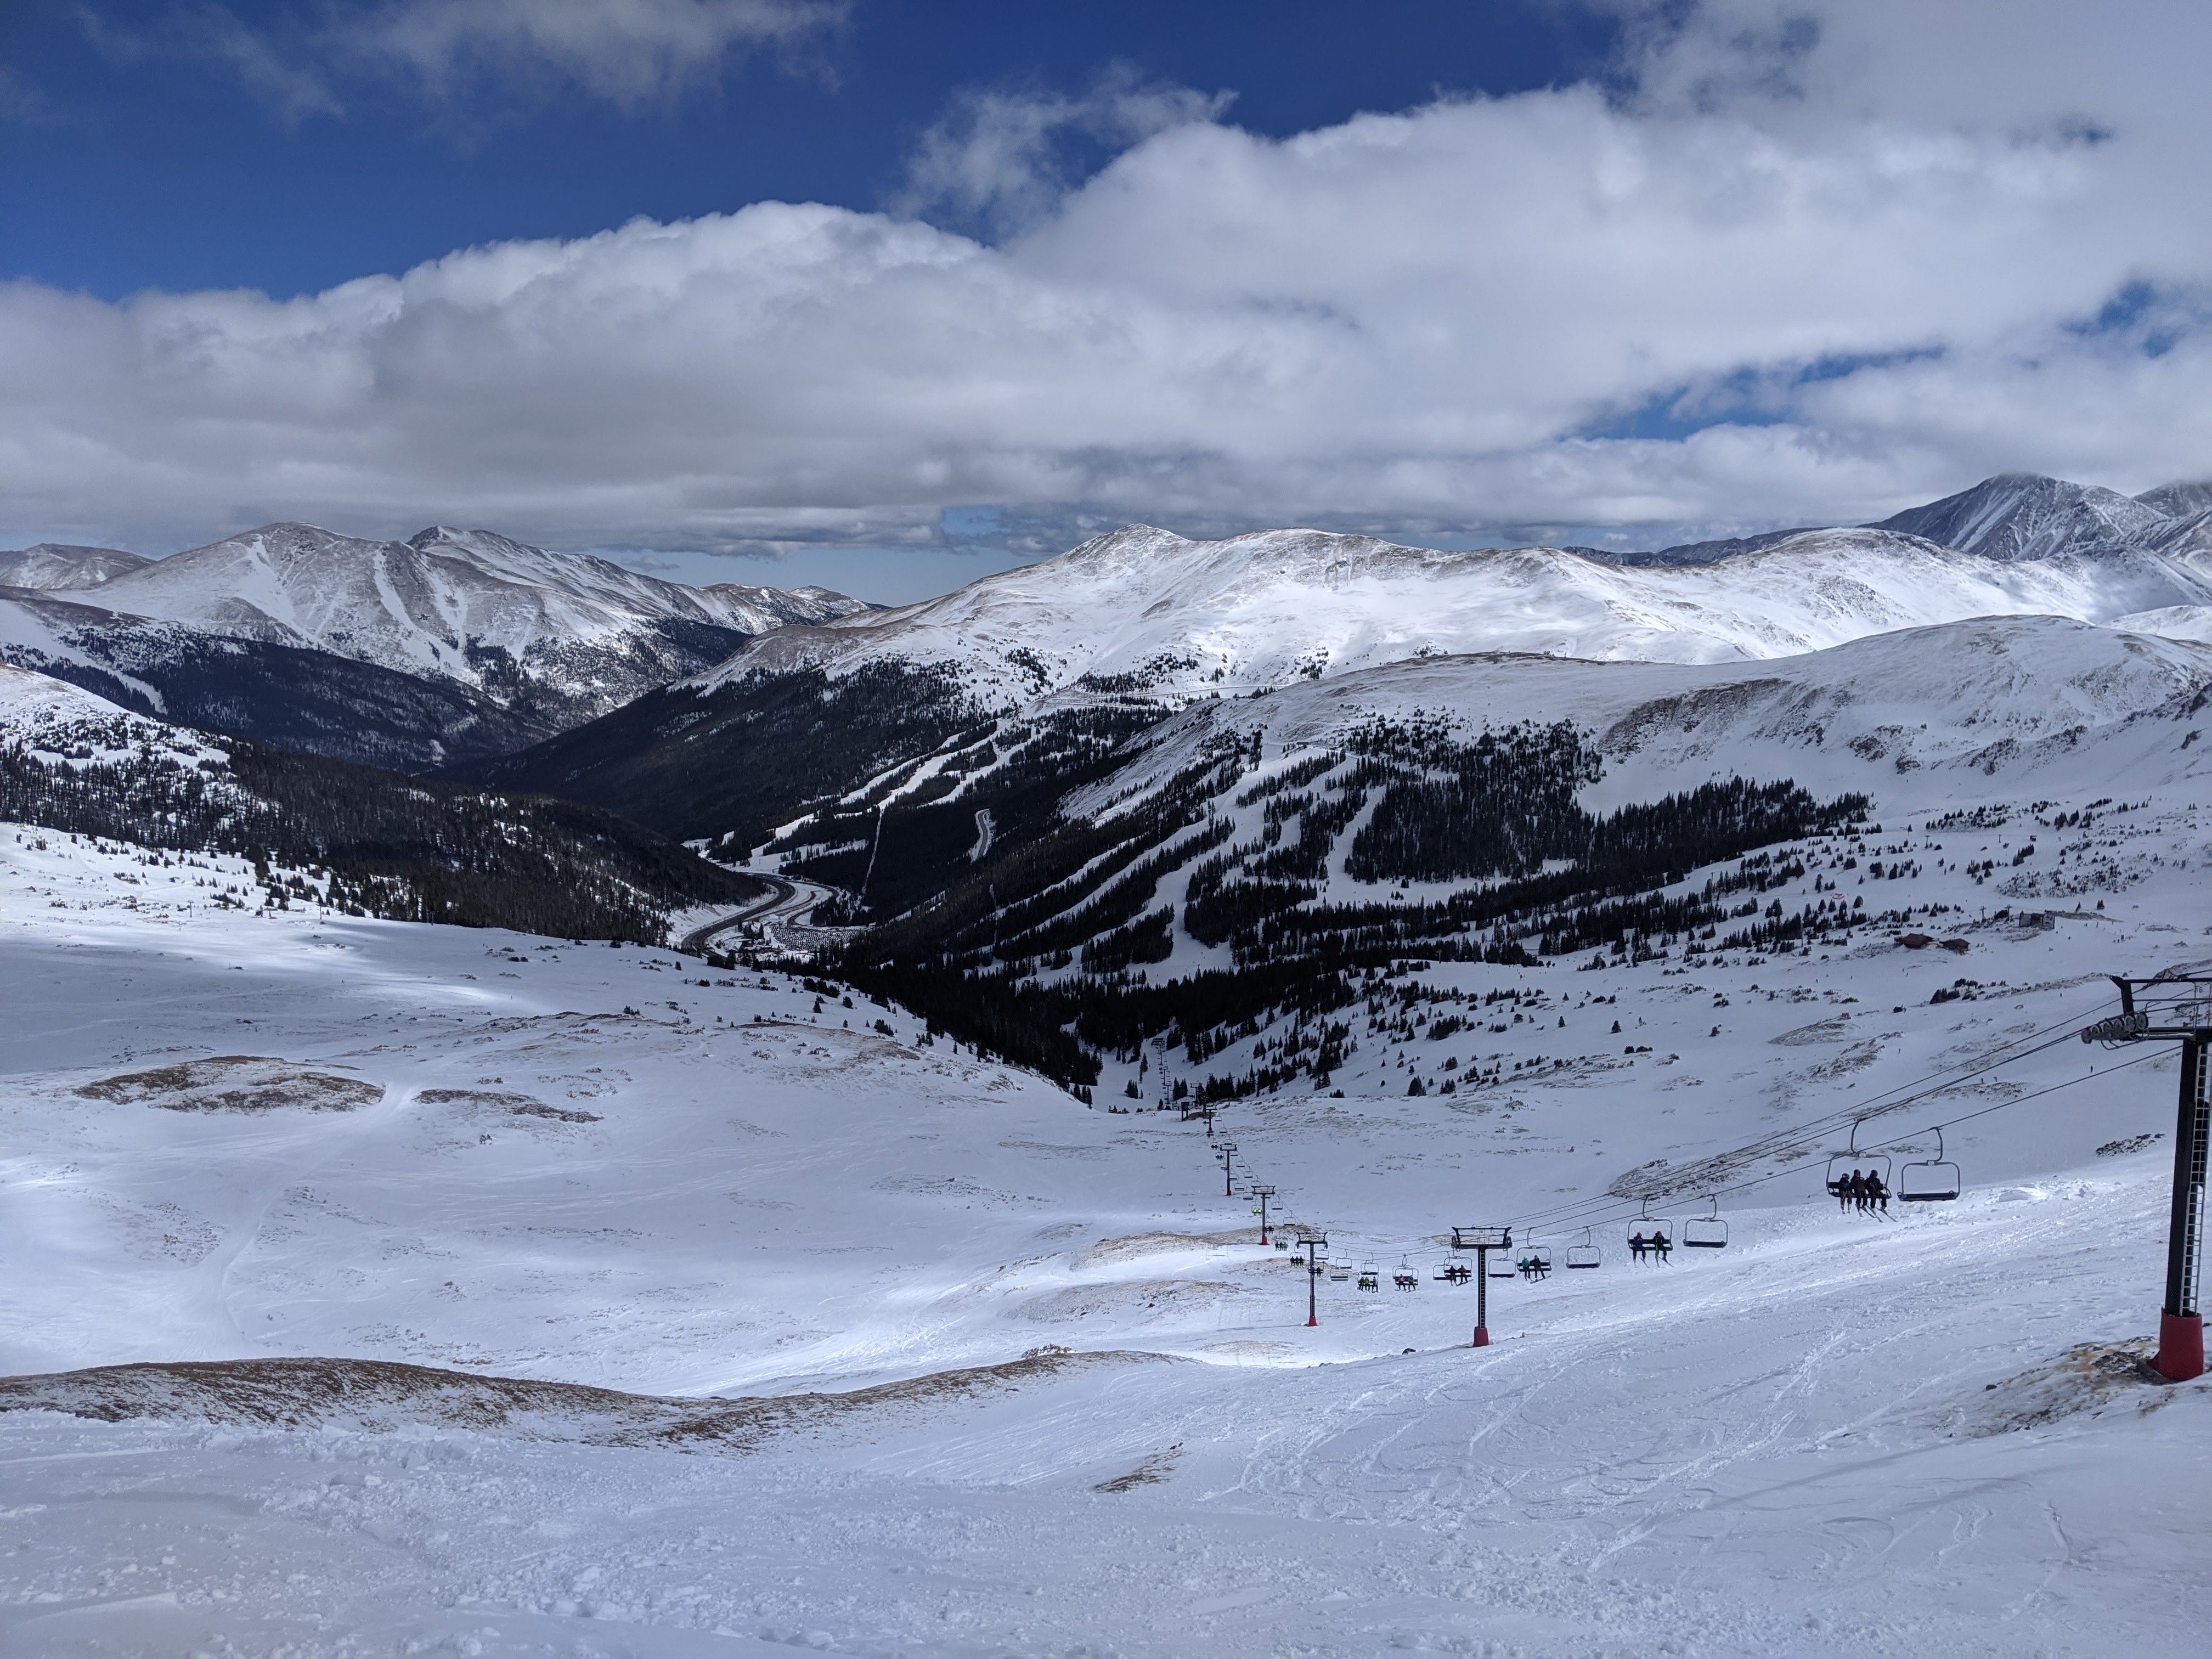 The view from the summit of Loveland pass